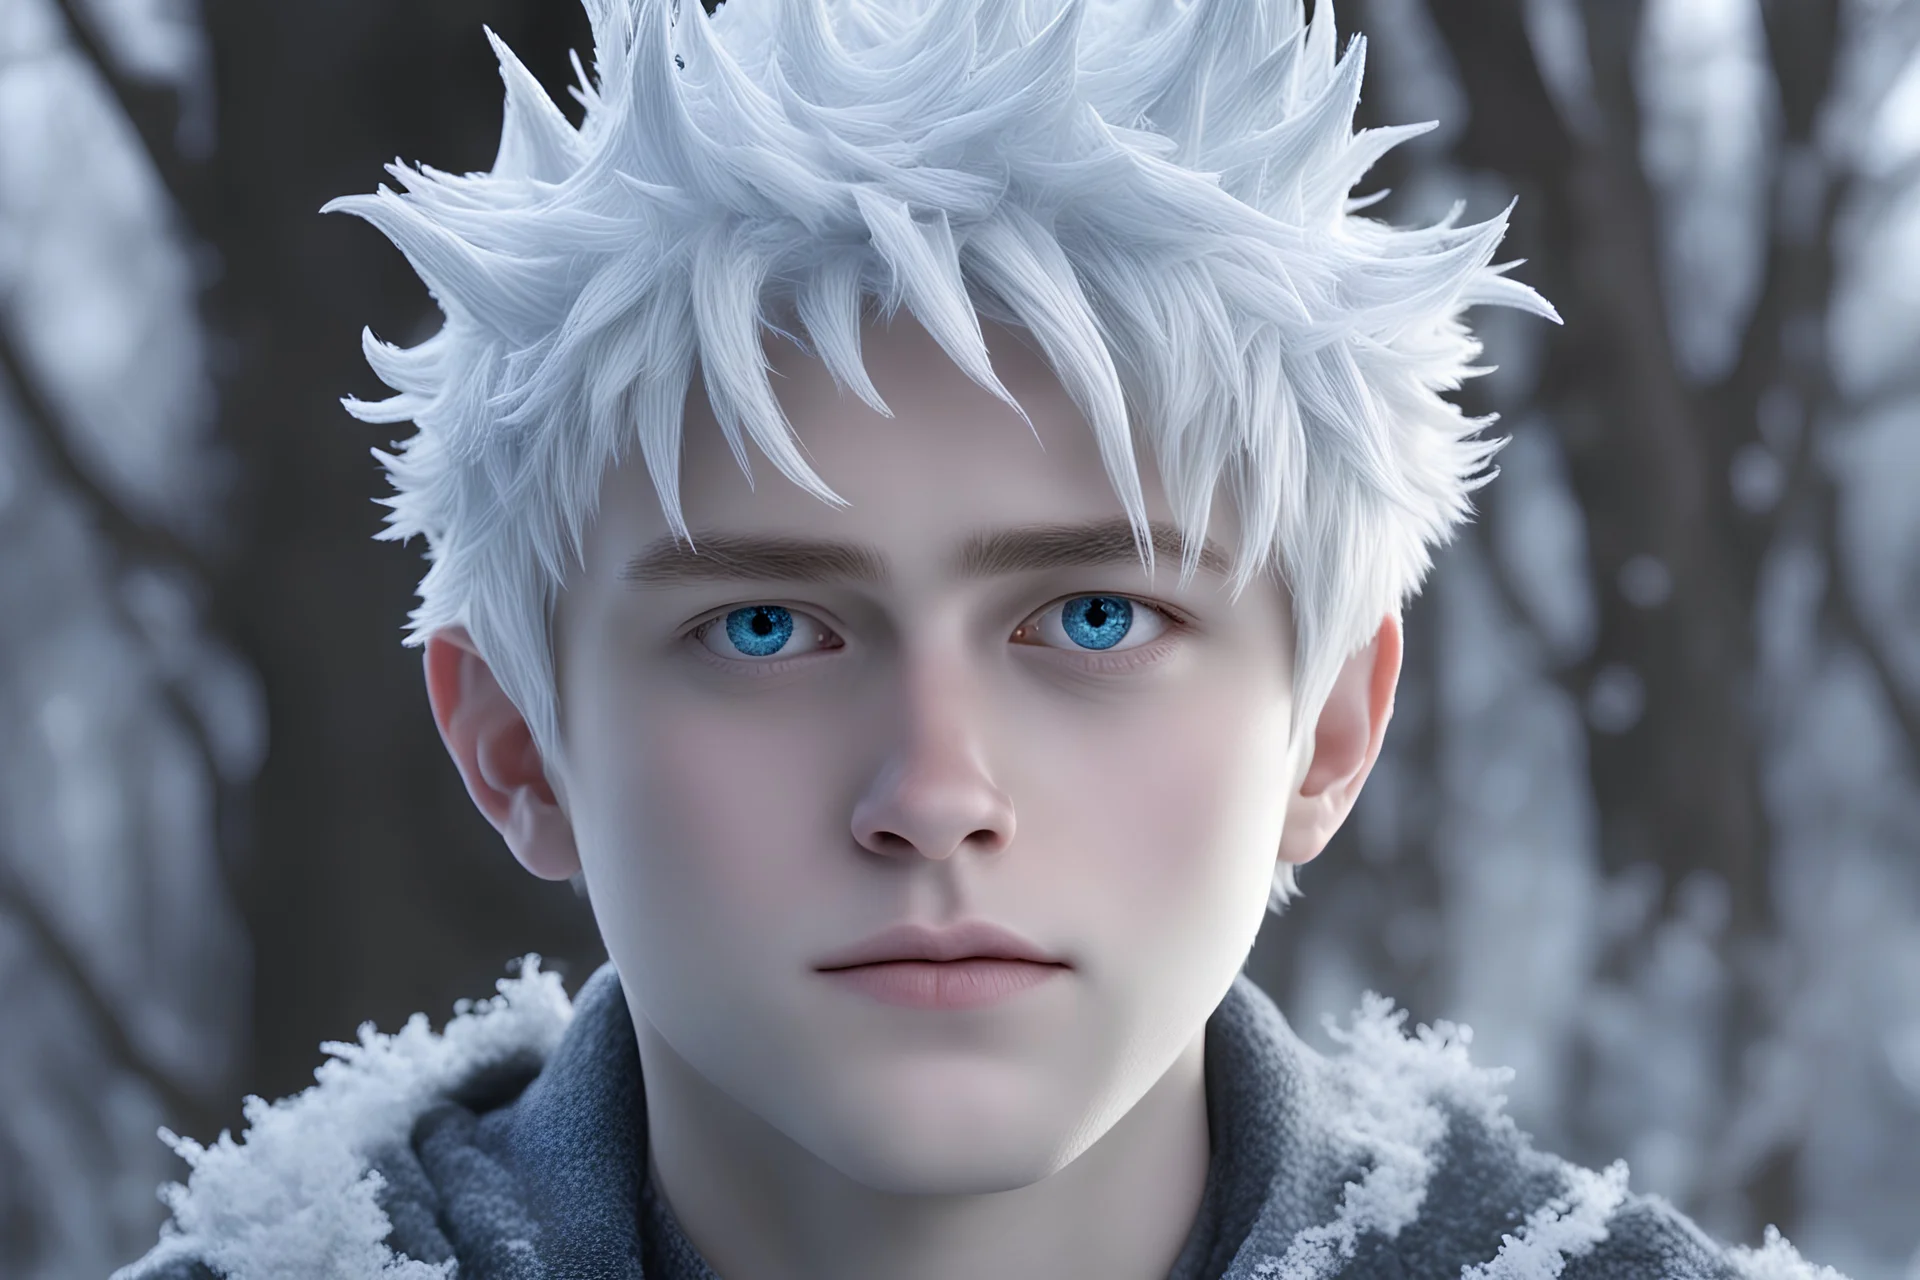 Bryce Frieze looks like Jack Frost who's a teenager at 13-16 years old